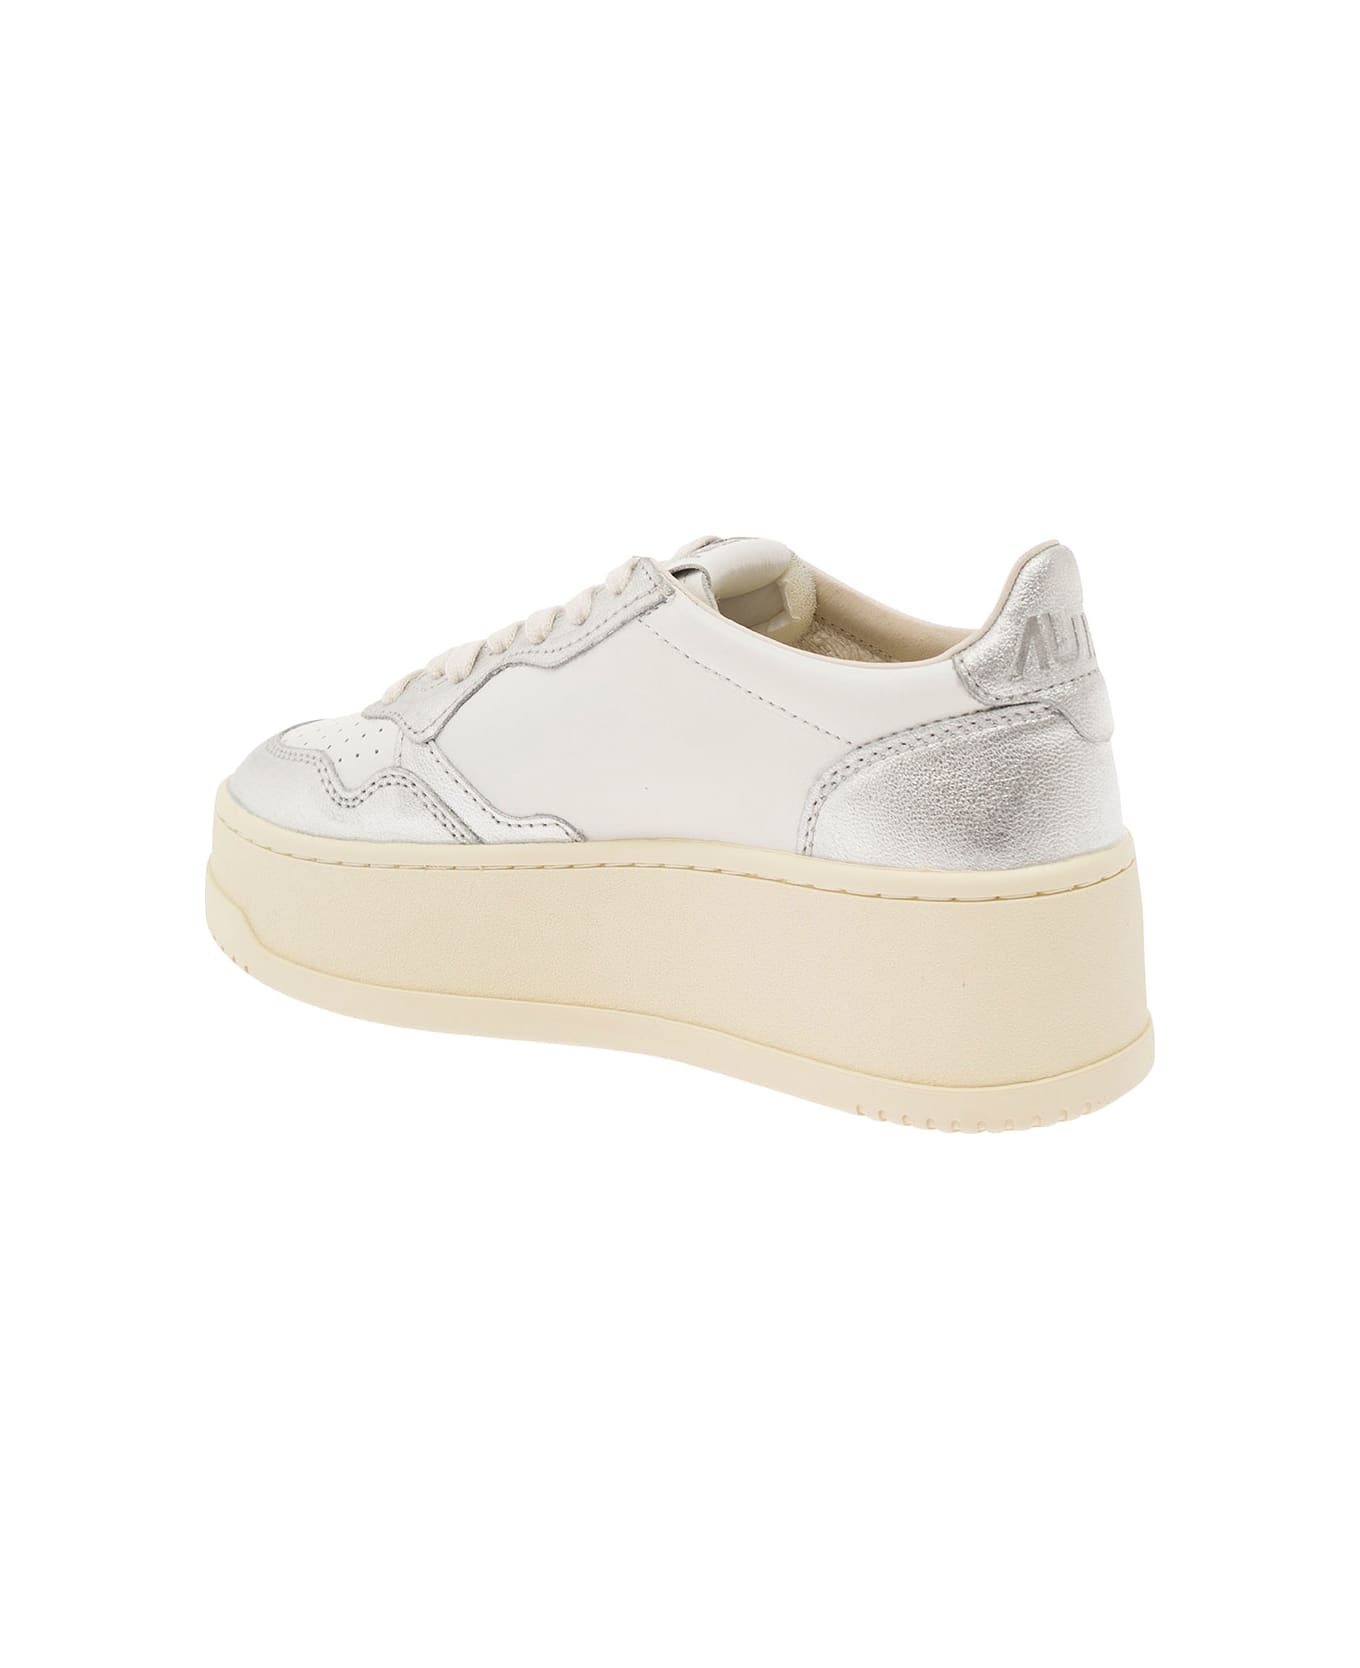 Autry White And Silver Low Top Platform Sneakers With Logo In Leather Woman - White